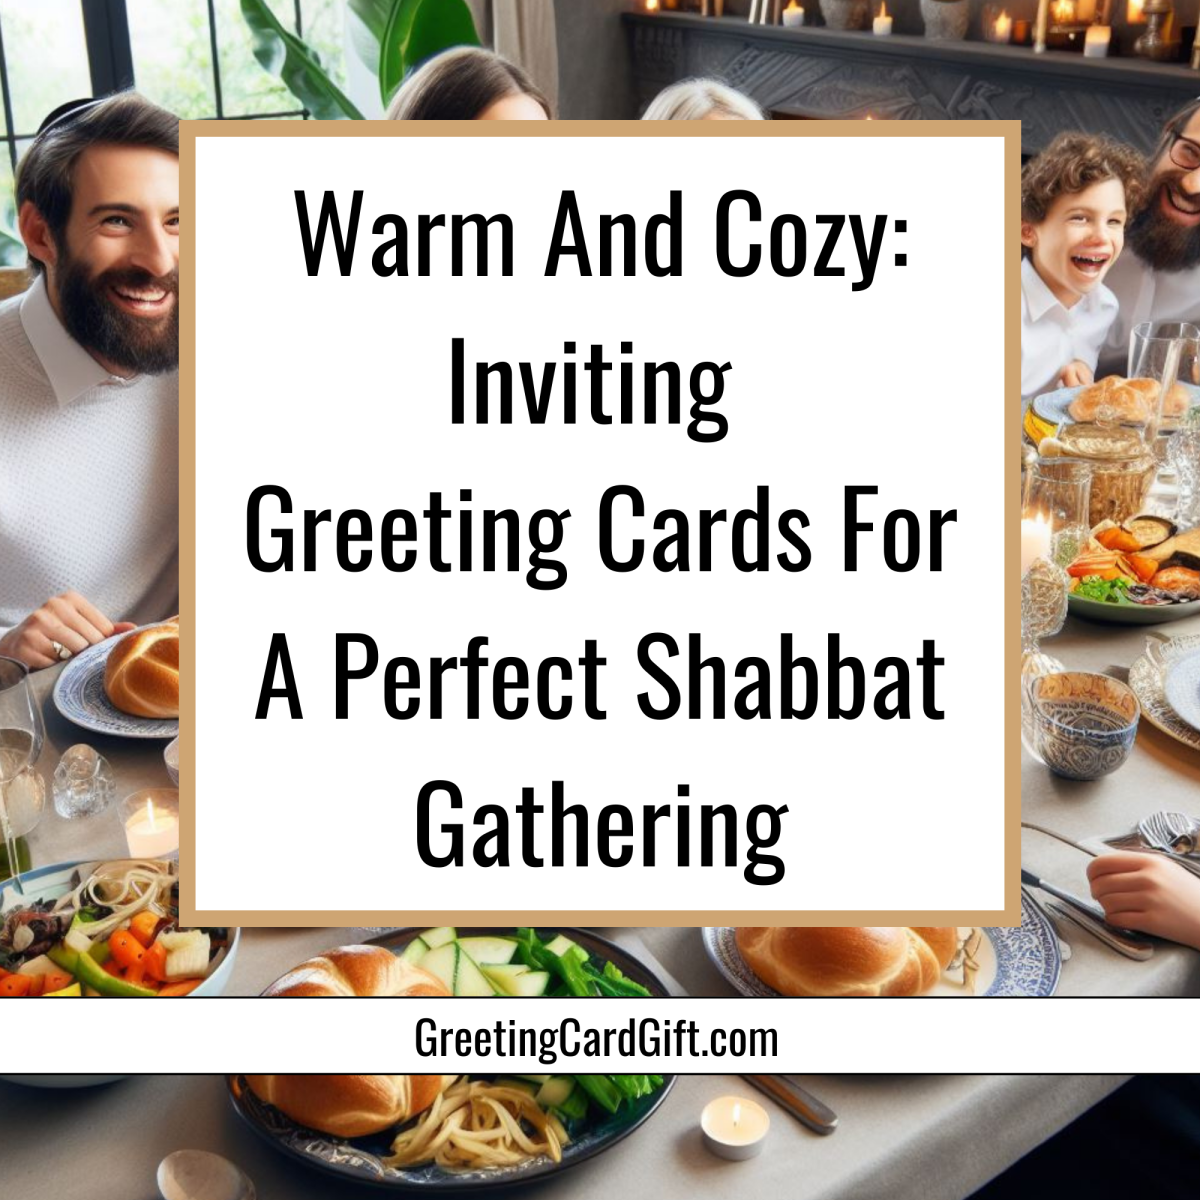 Warm And Cozy: Inviting Greeting Cards For A Perfect Shabbat Gathering